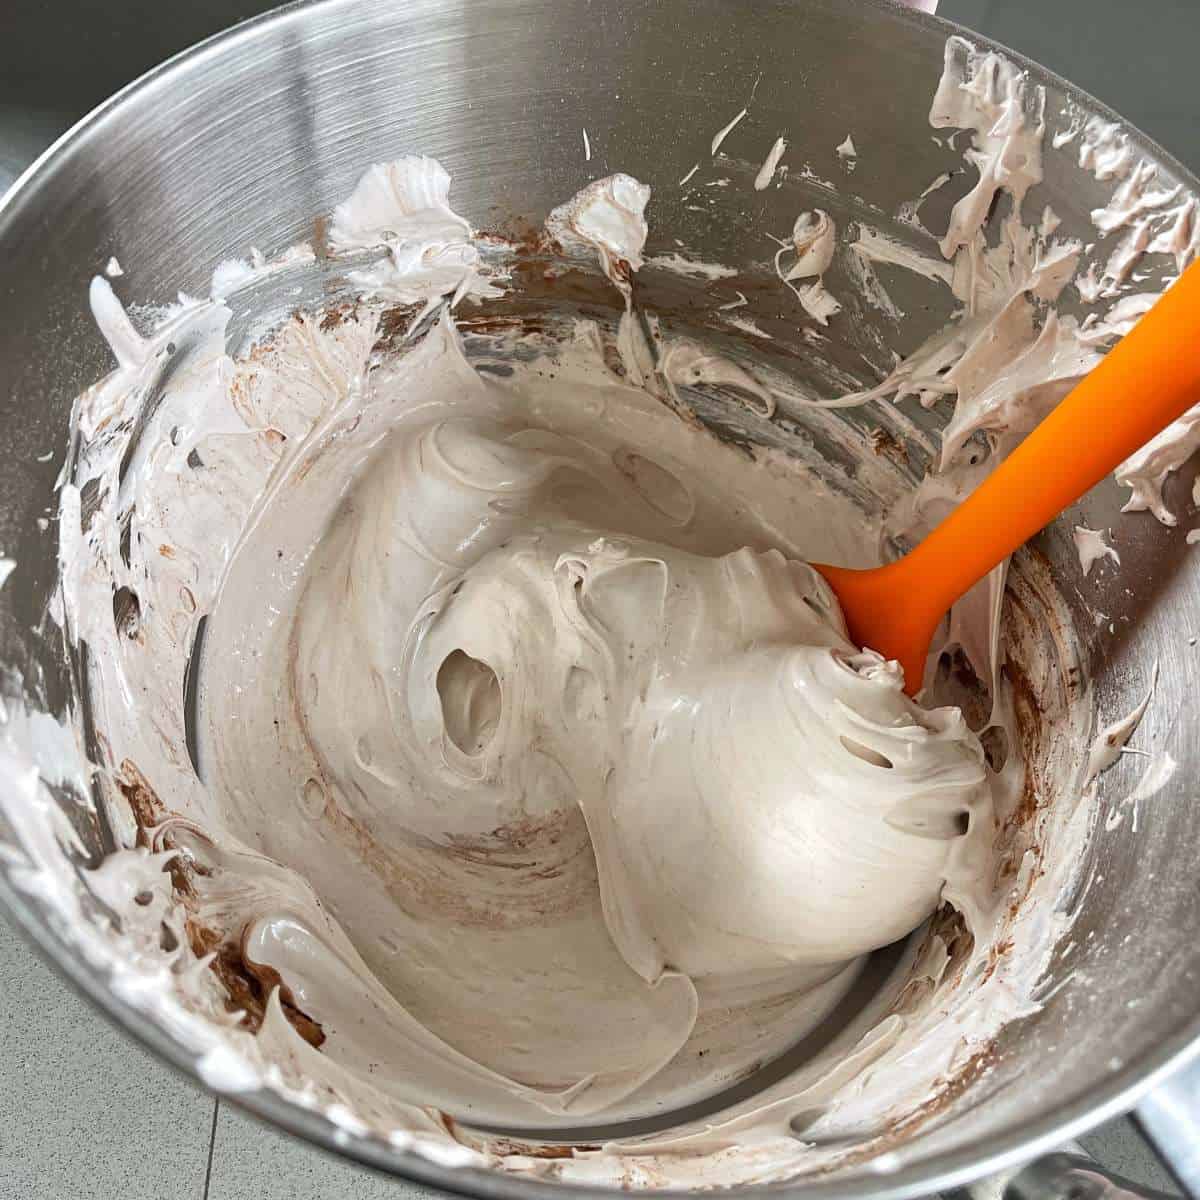 Chocolate pavlova mixture in a mixing bowl